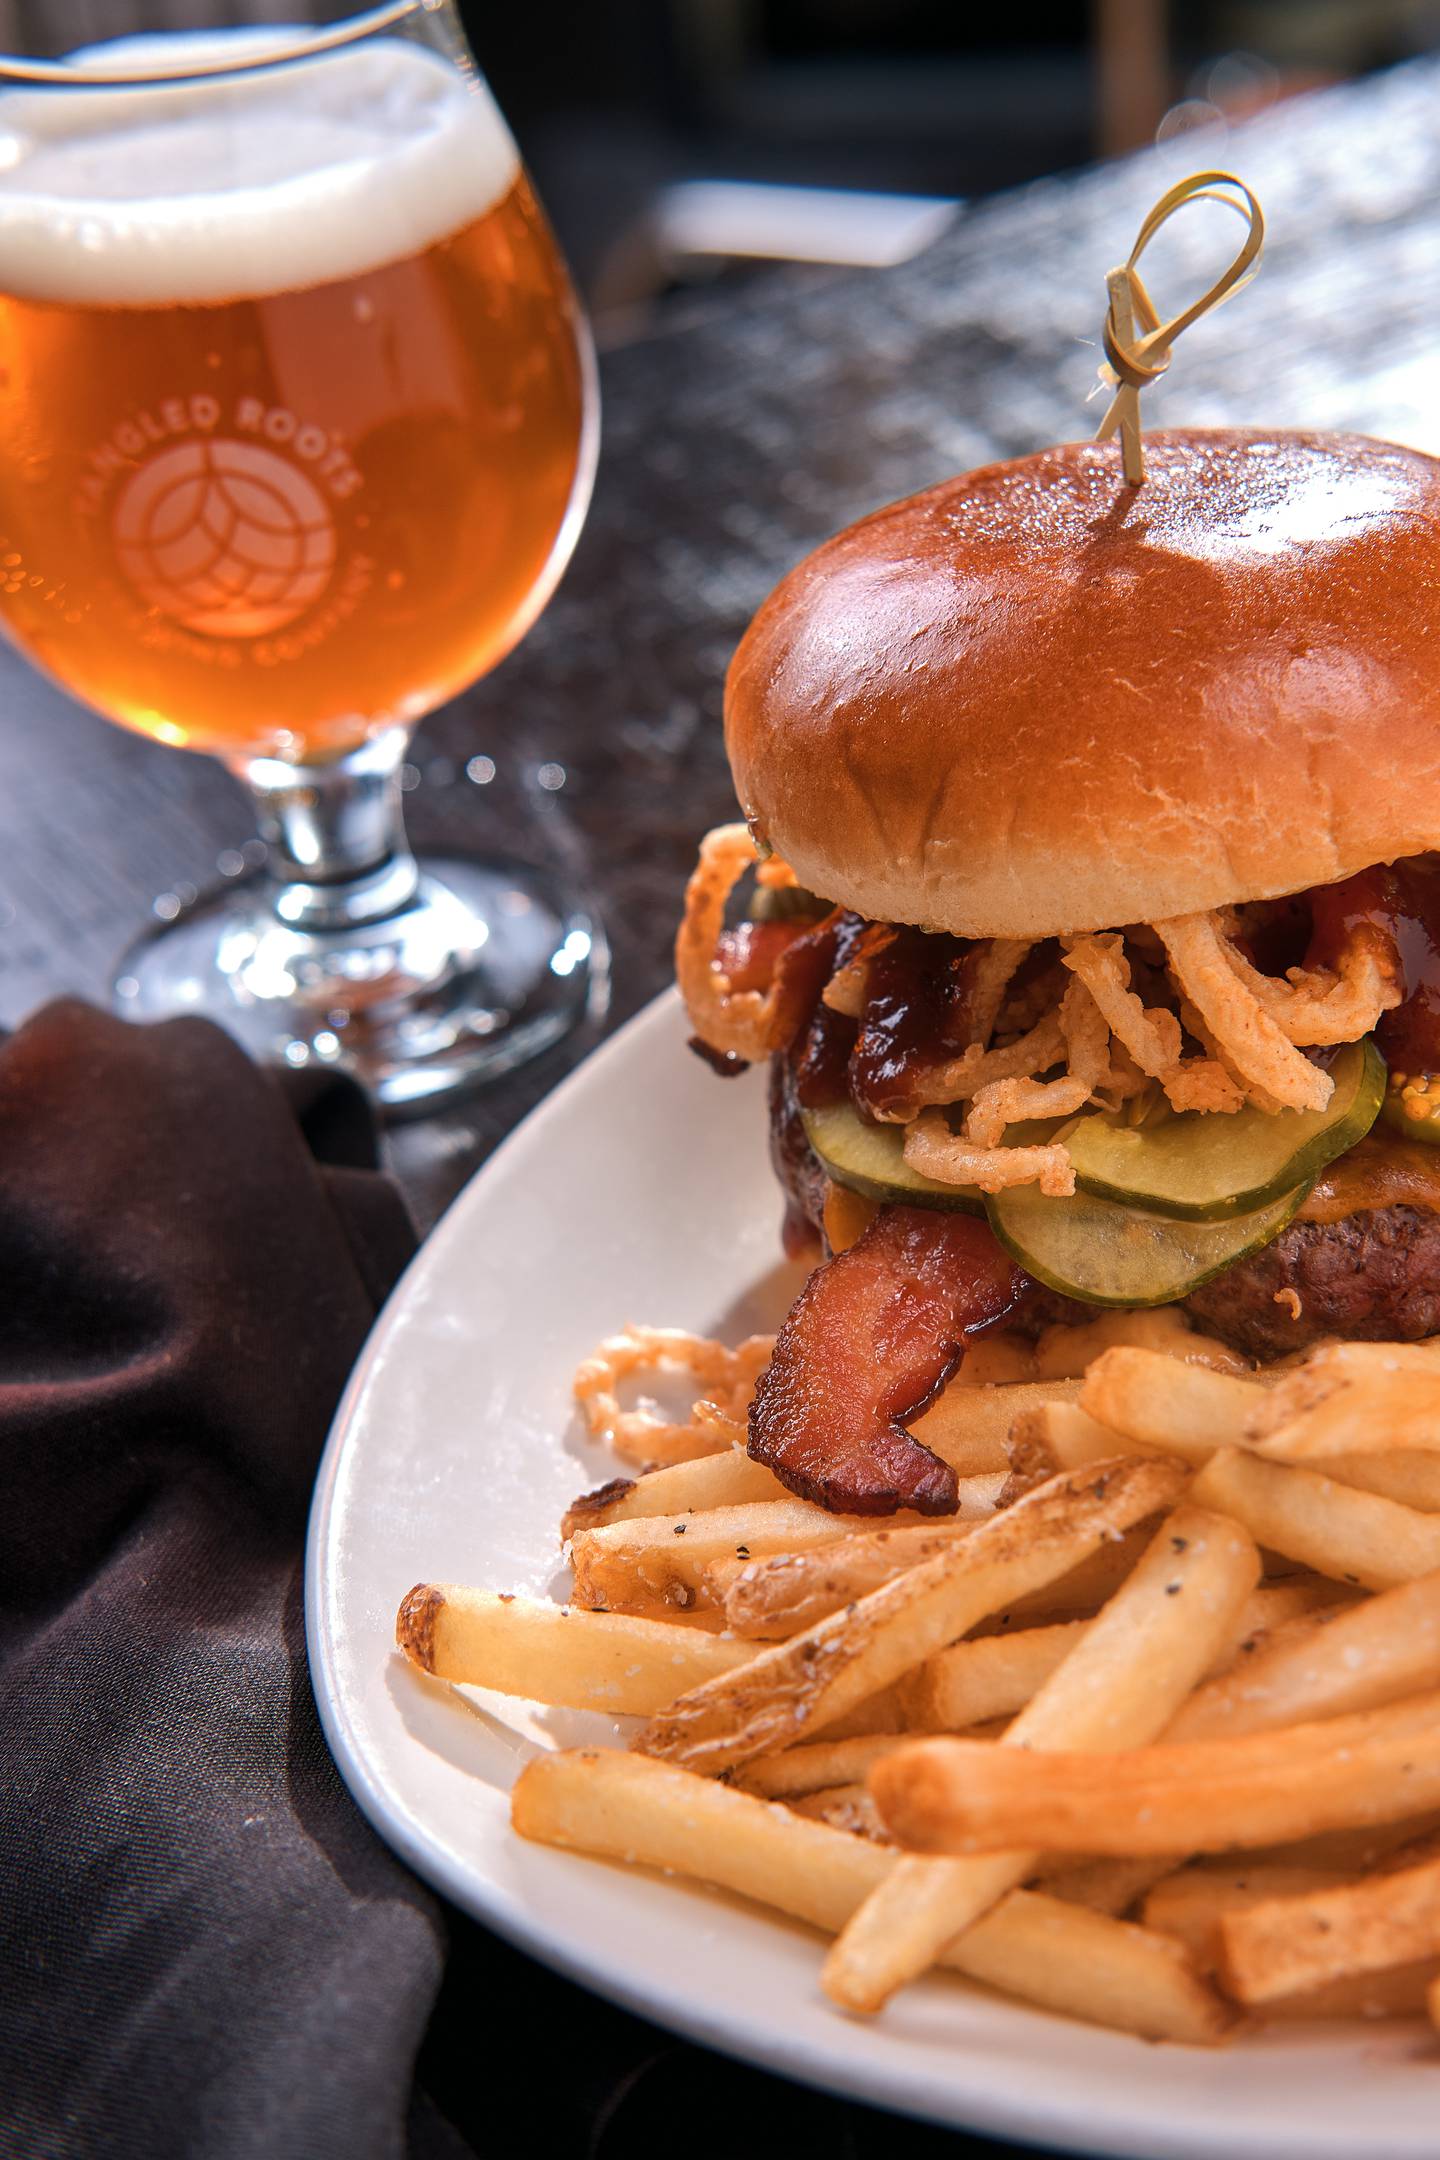 This burger has Bourbon cherry barbecue sauce, bacon, aged cheddar, house pickles, frites aioli and crispy onions. Pair it with a Kit Kupfer Amber Ale.